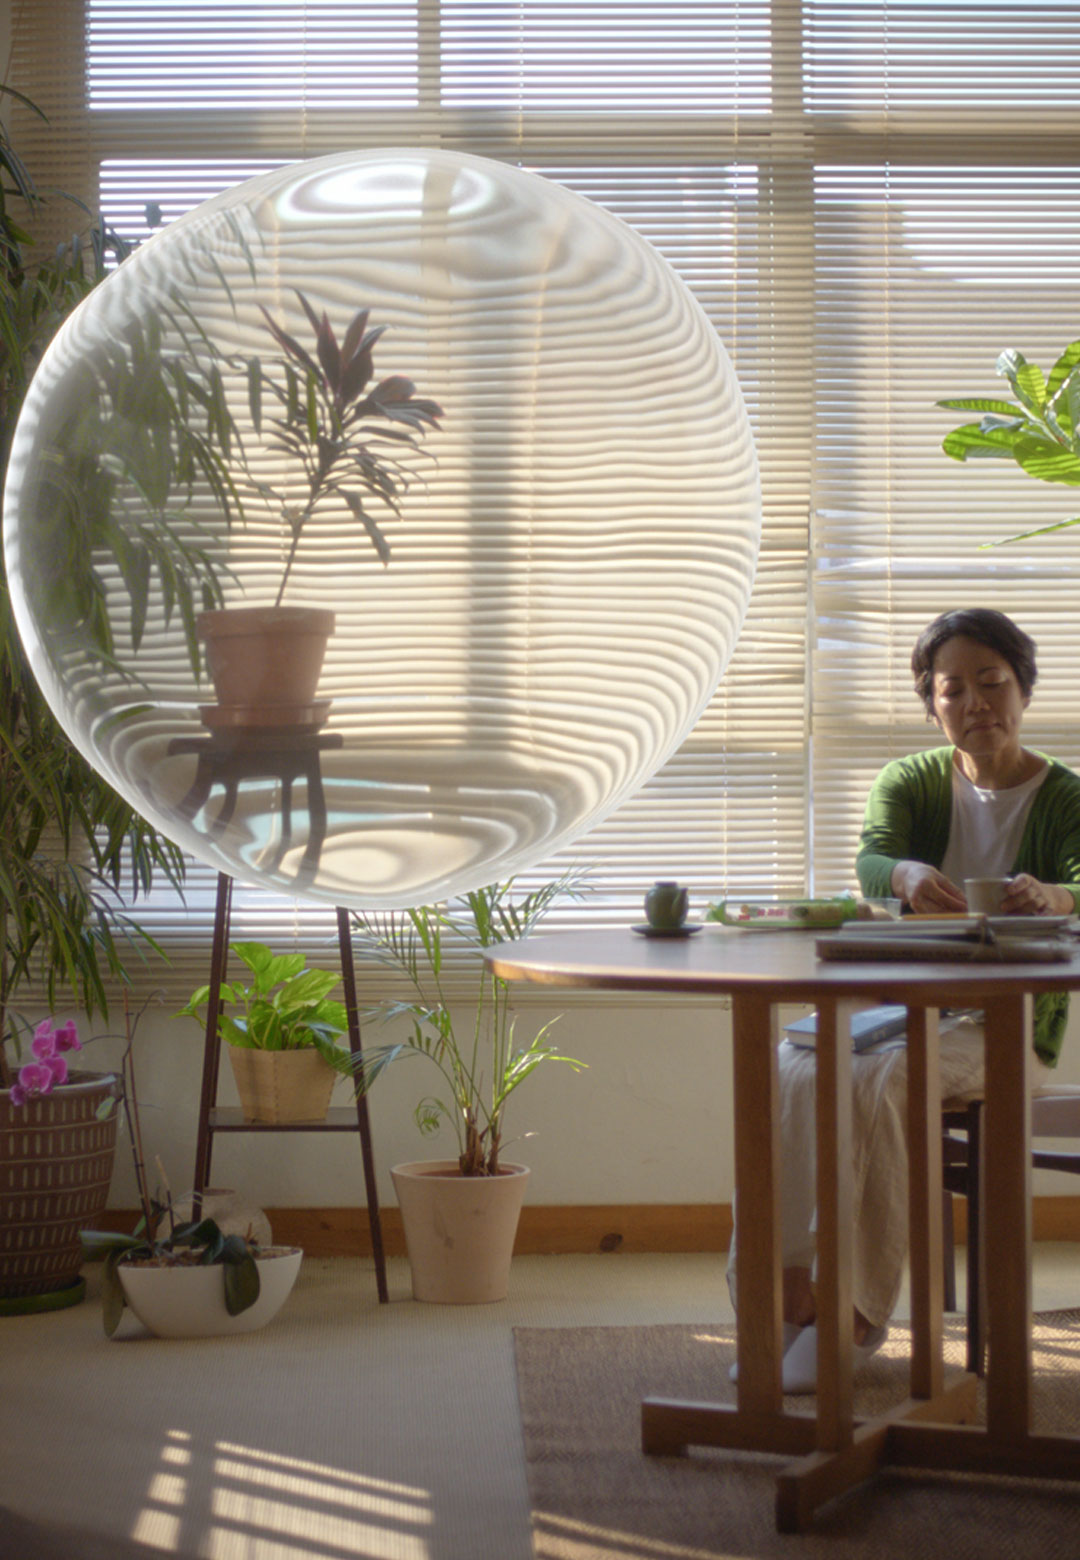 SPACE10 releases short film delineating ‘Everyday Experiments’